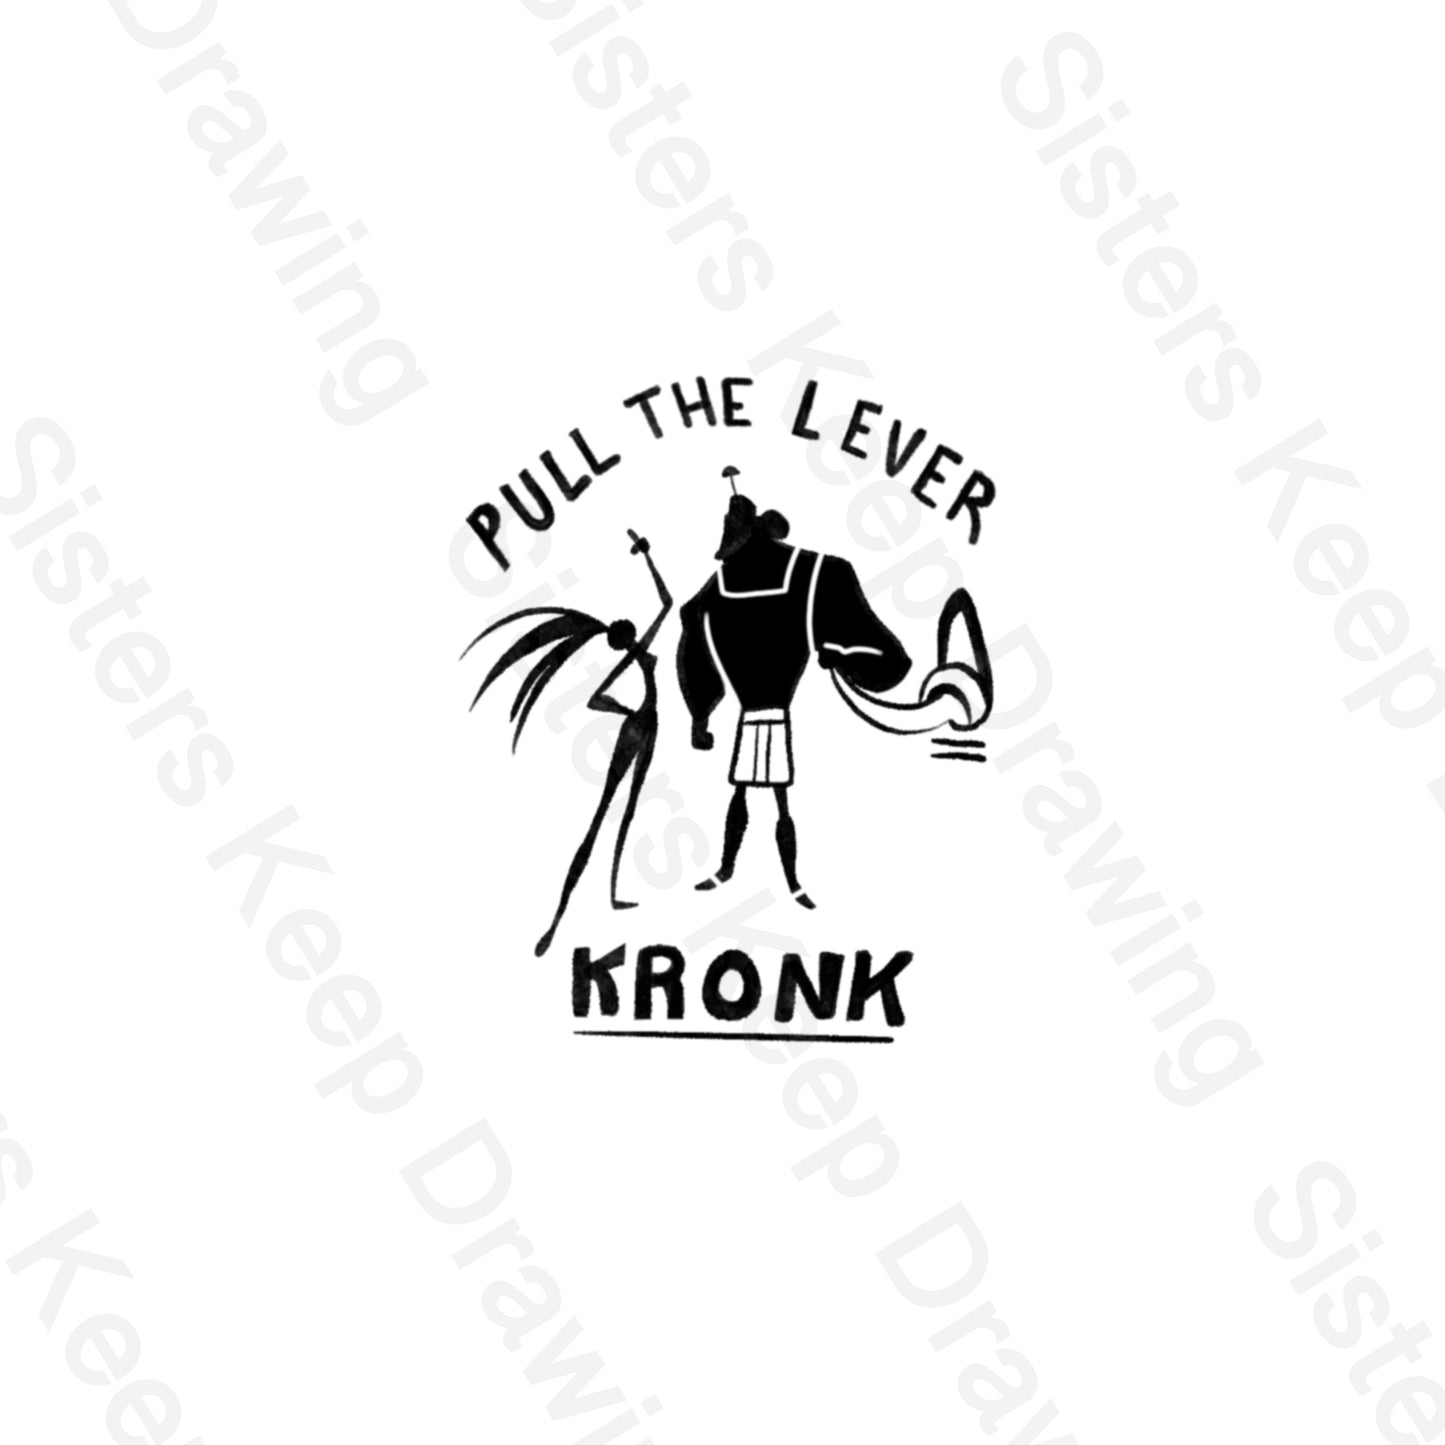 Pull the lever kronk -Tattoo Transparent Permission PNG- instant download digital printable ar